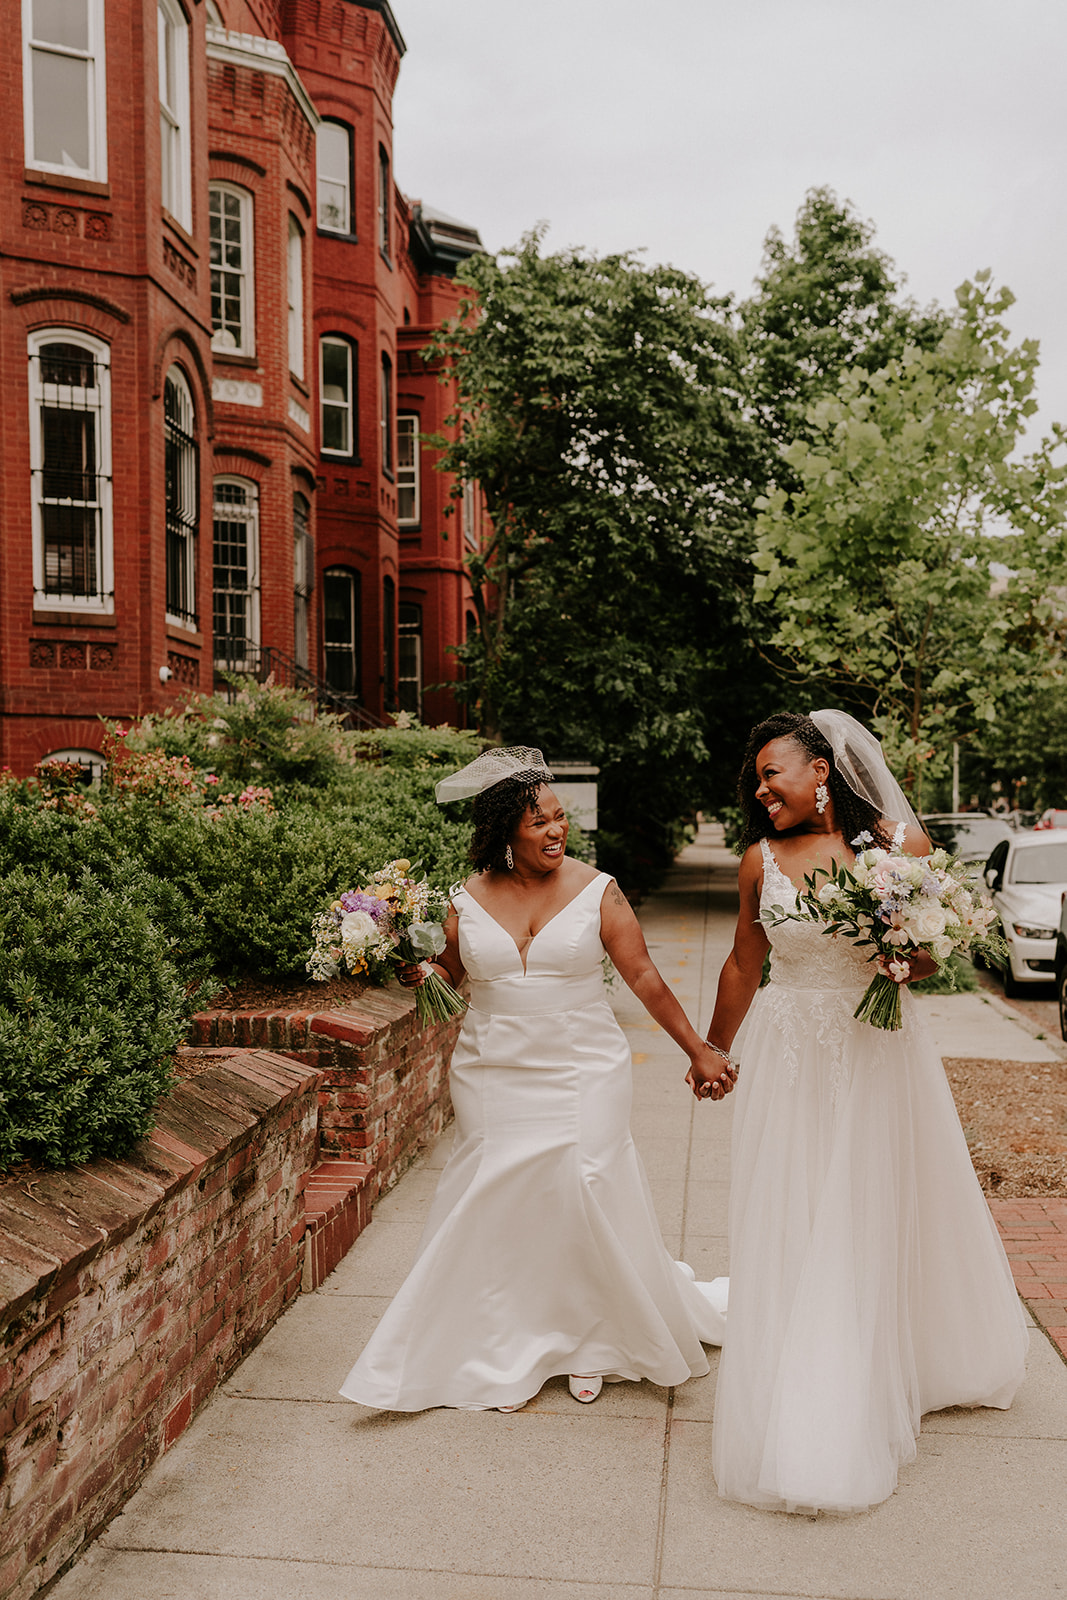 A same-sex couple brunch micro elopement wedding in DC at Iron Gate Restaurant